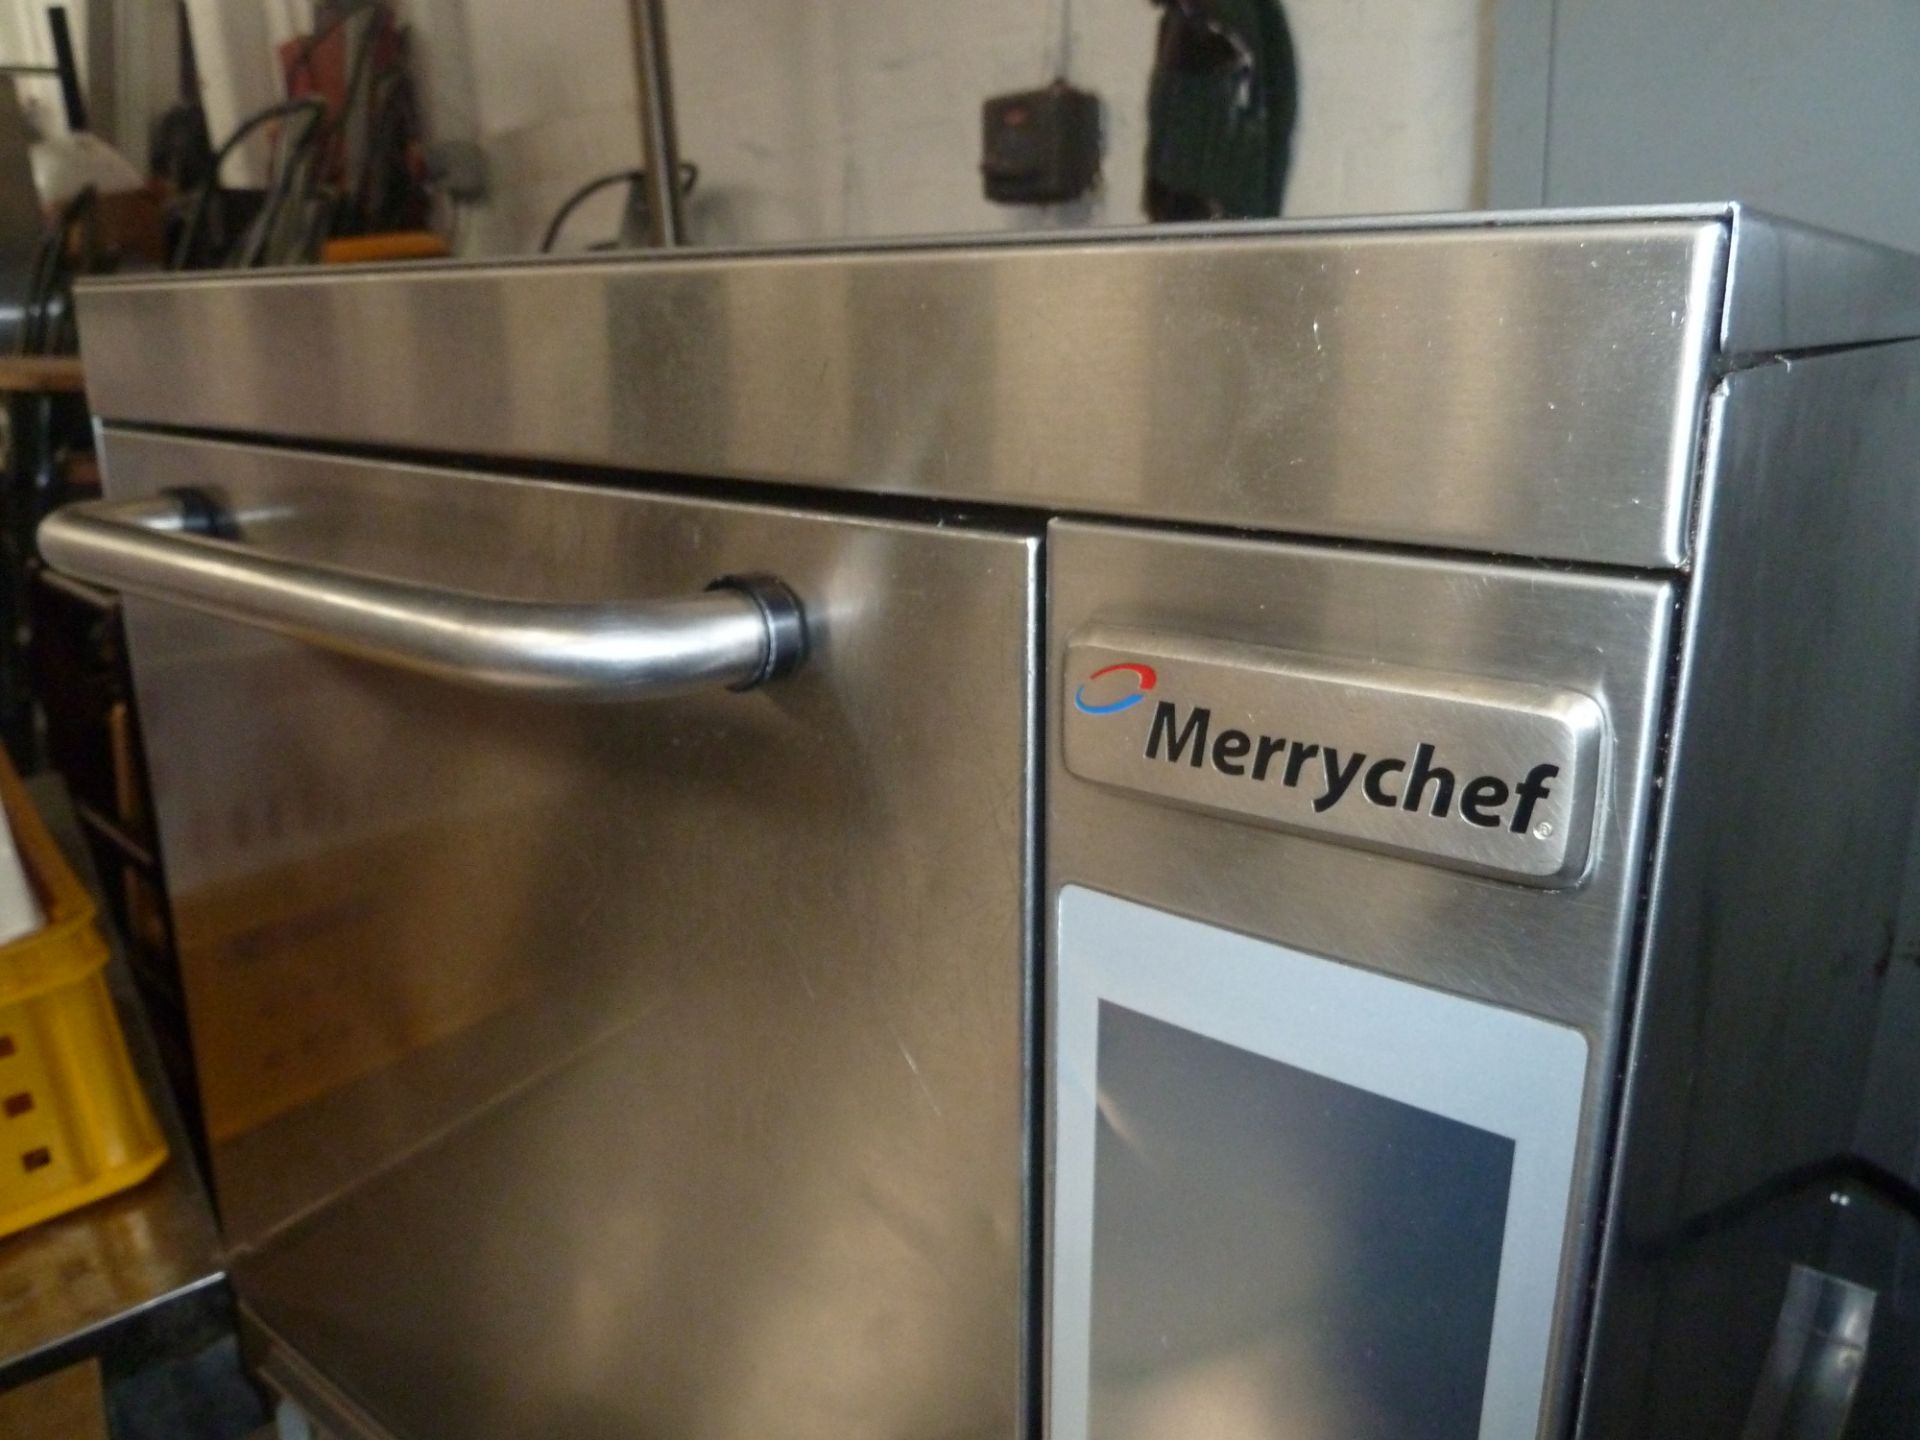 * Merrychef e3 high speed combi microwave oven fully serviced by merrychef - working order - Image 3 of 3